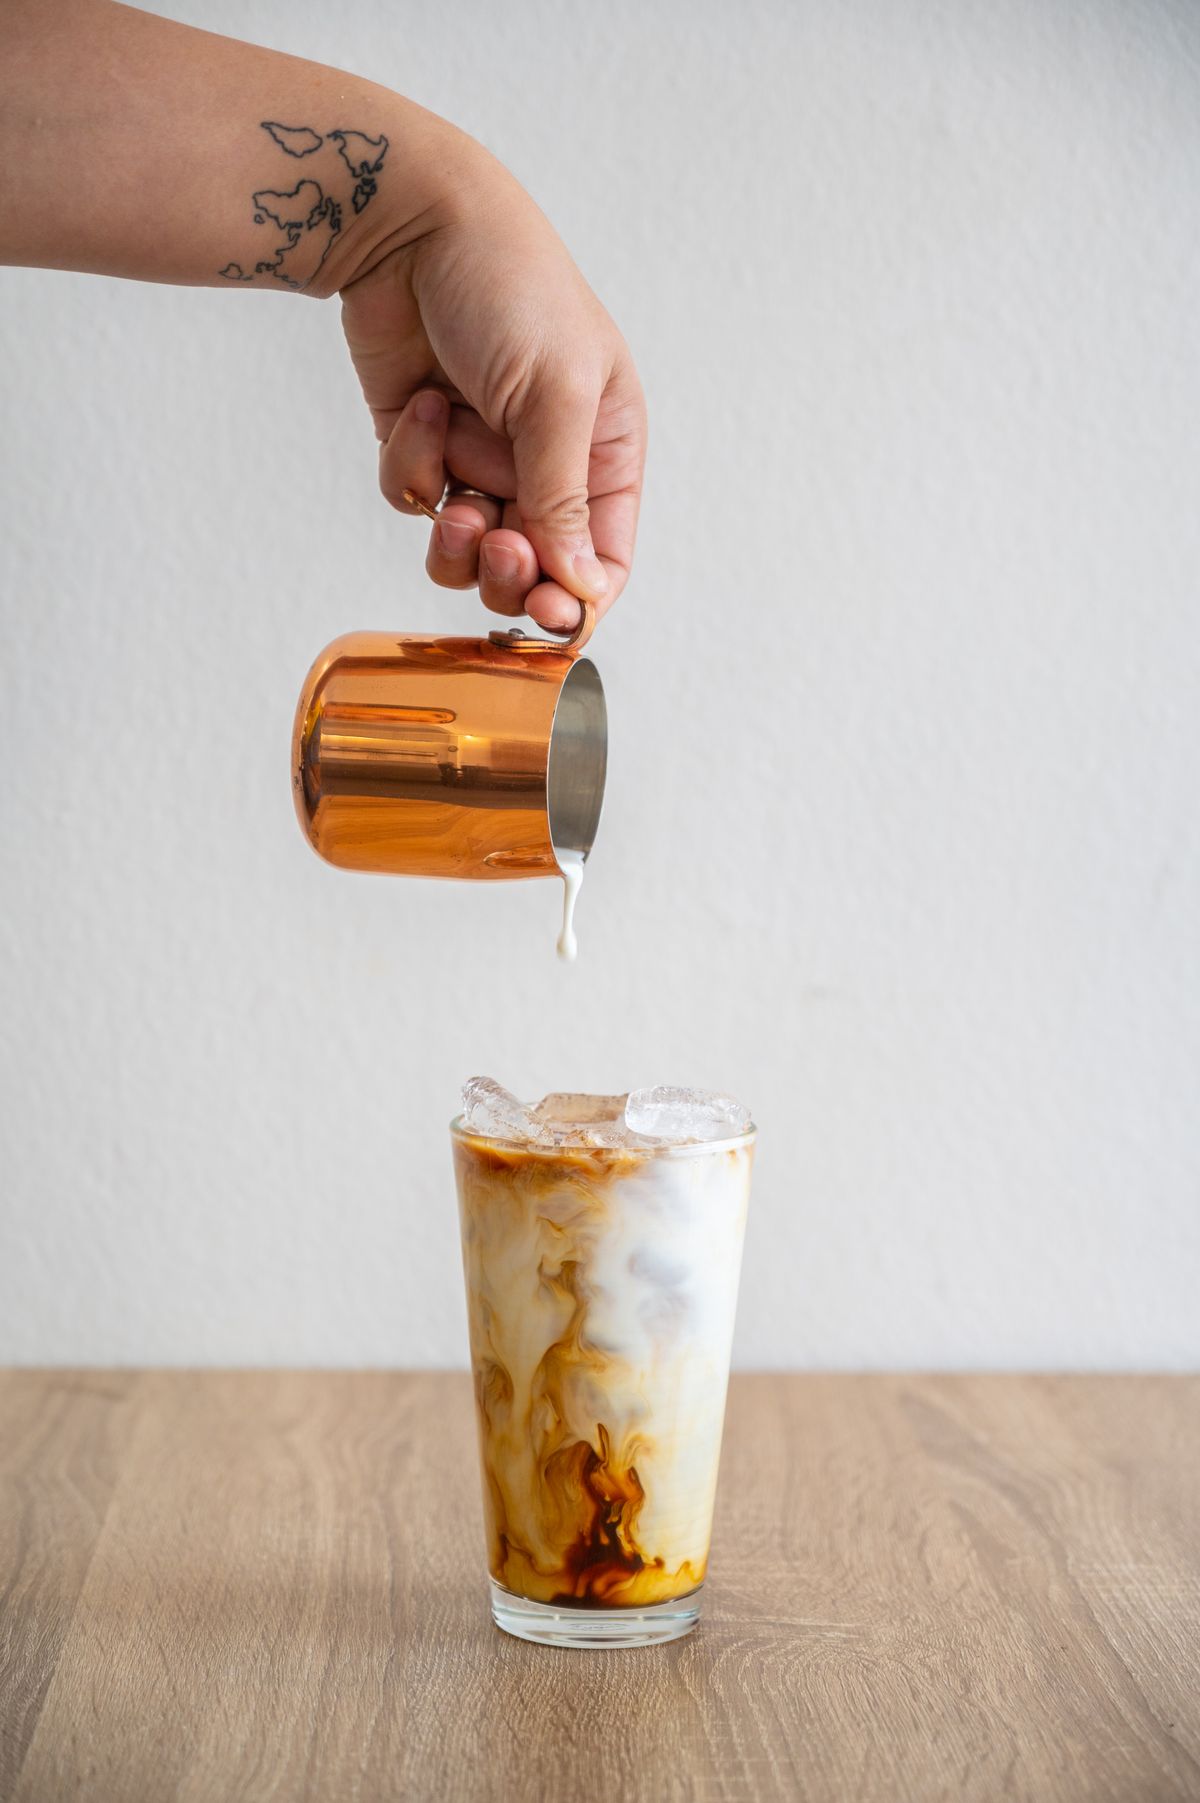 Barista hand pouring milk into an iced coffee for making iced latte.